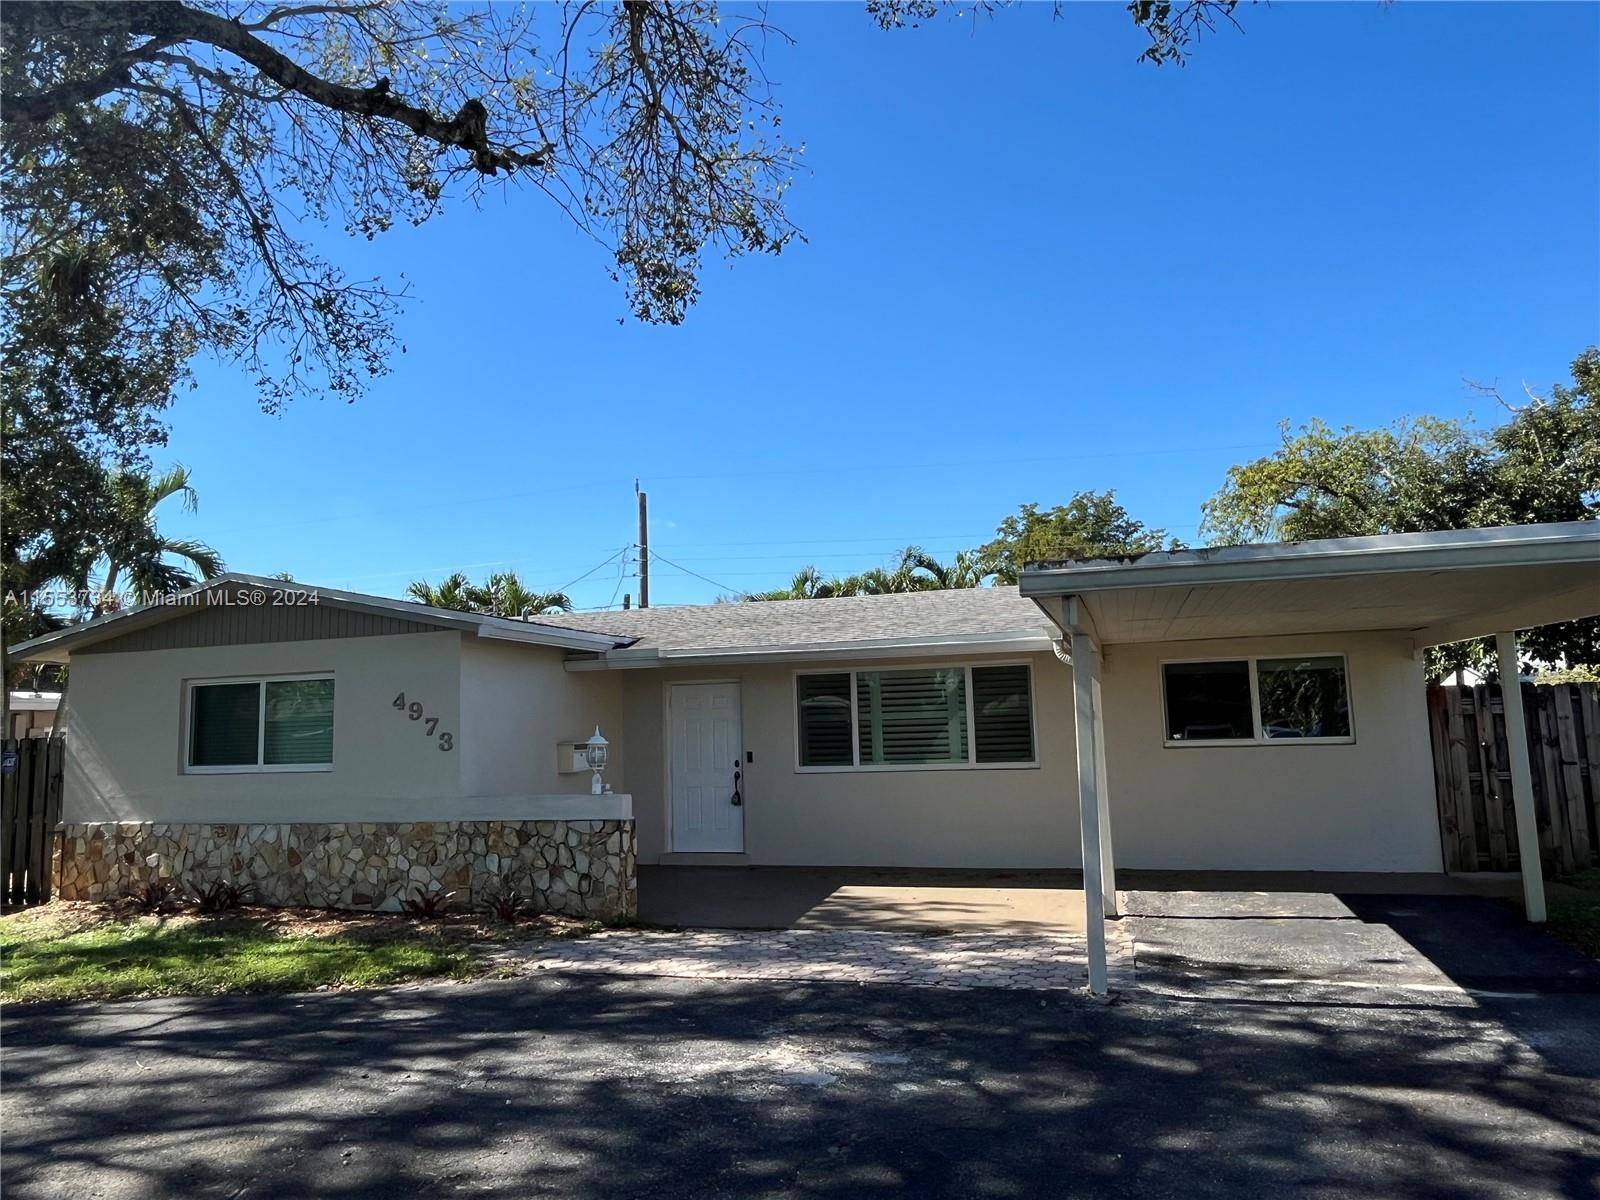 Family style community in center of Cooper City Fresh painted 4bedroom single family house.